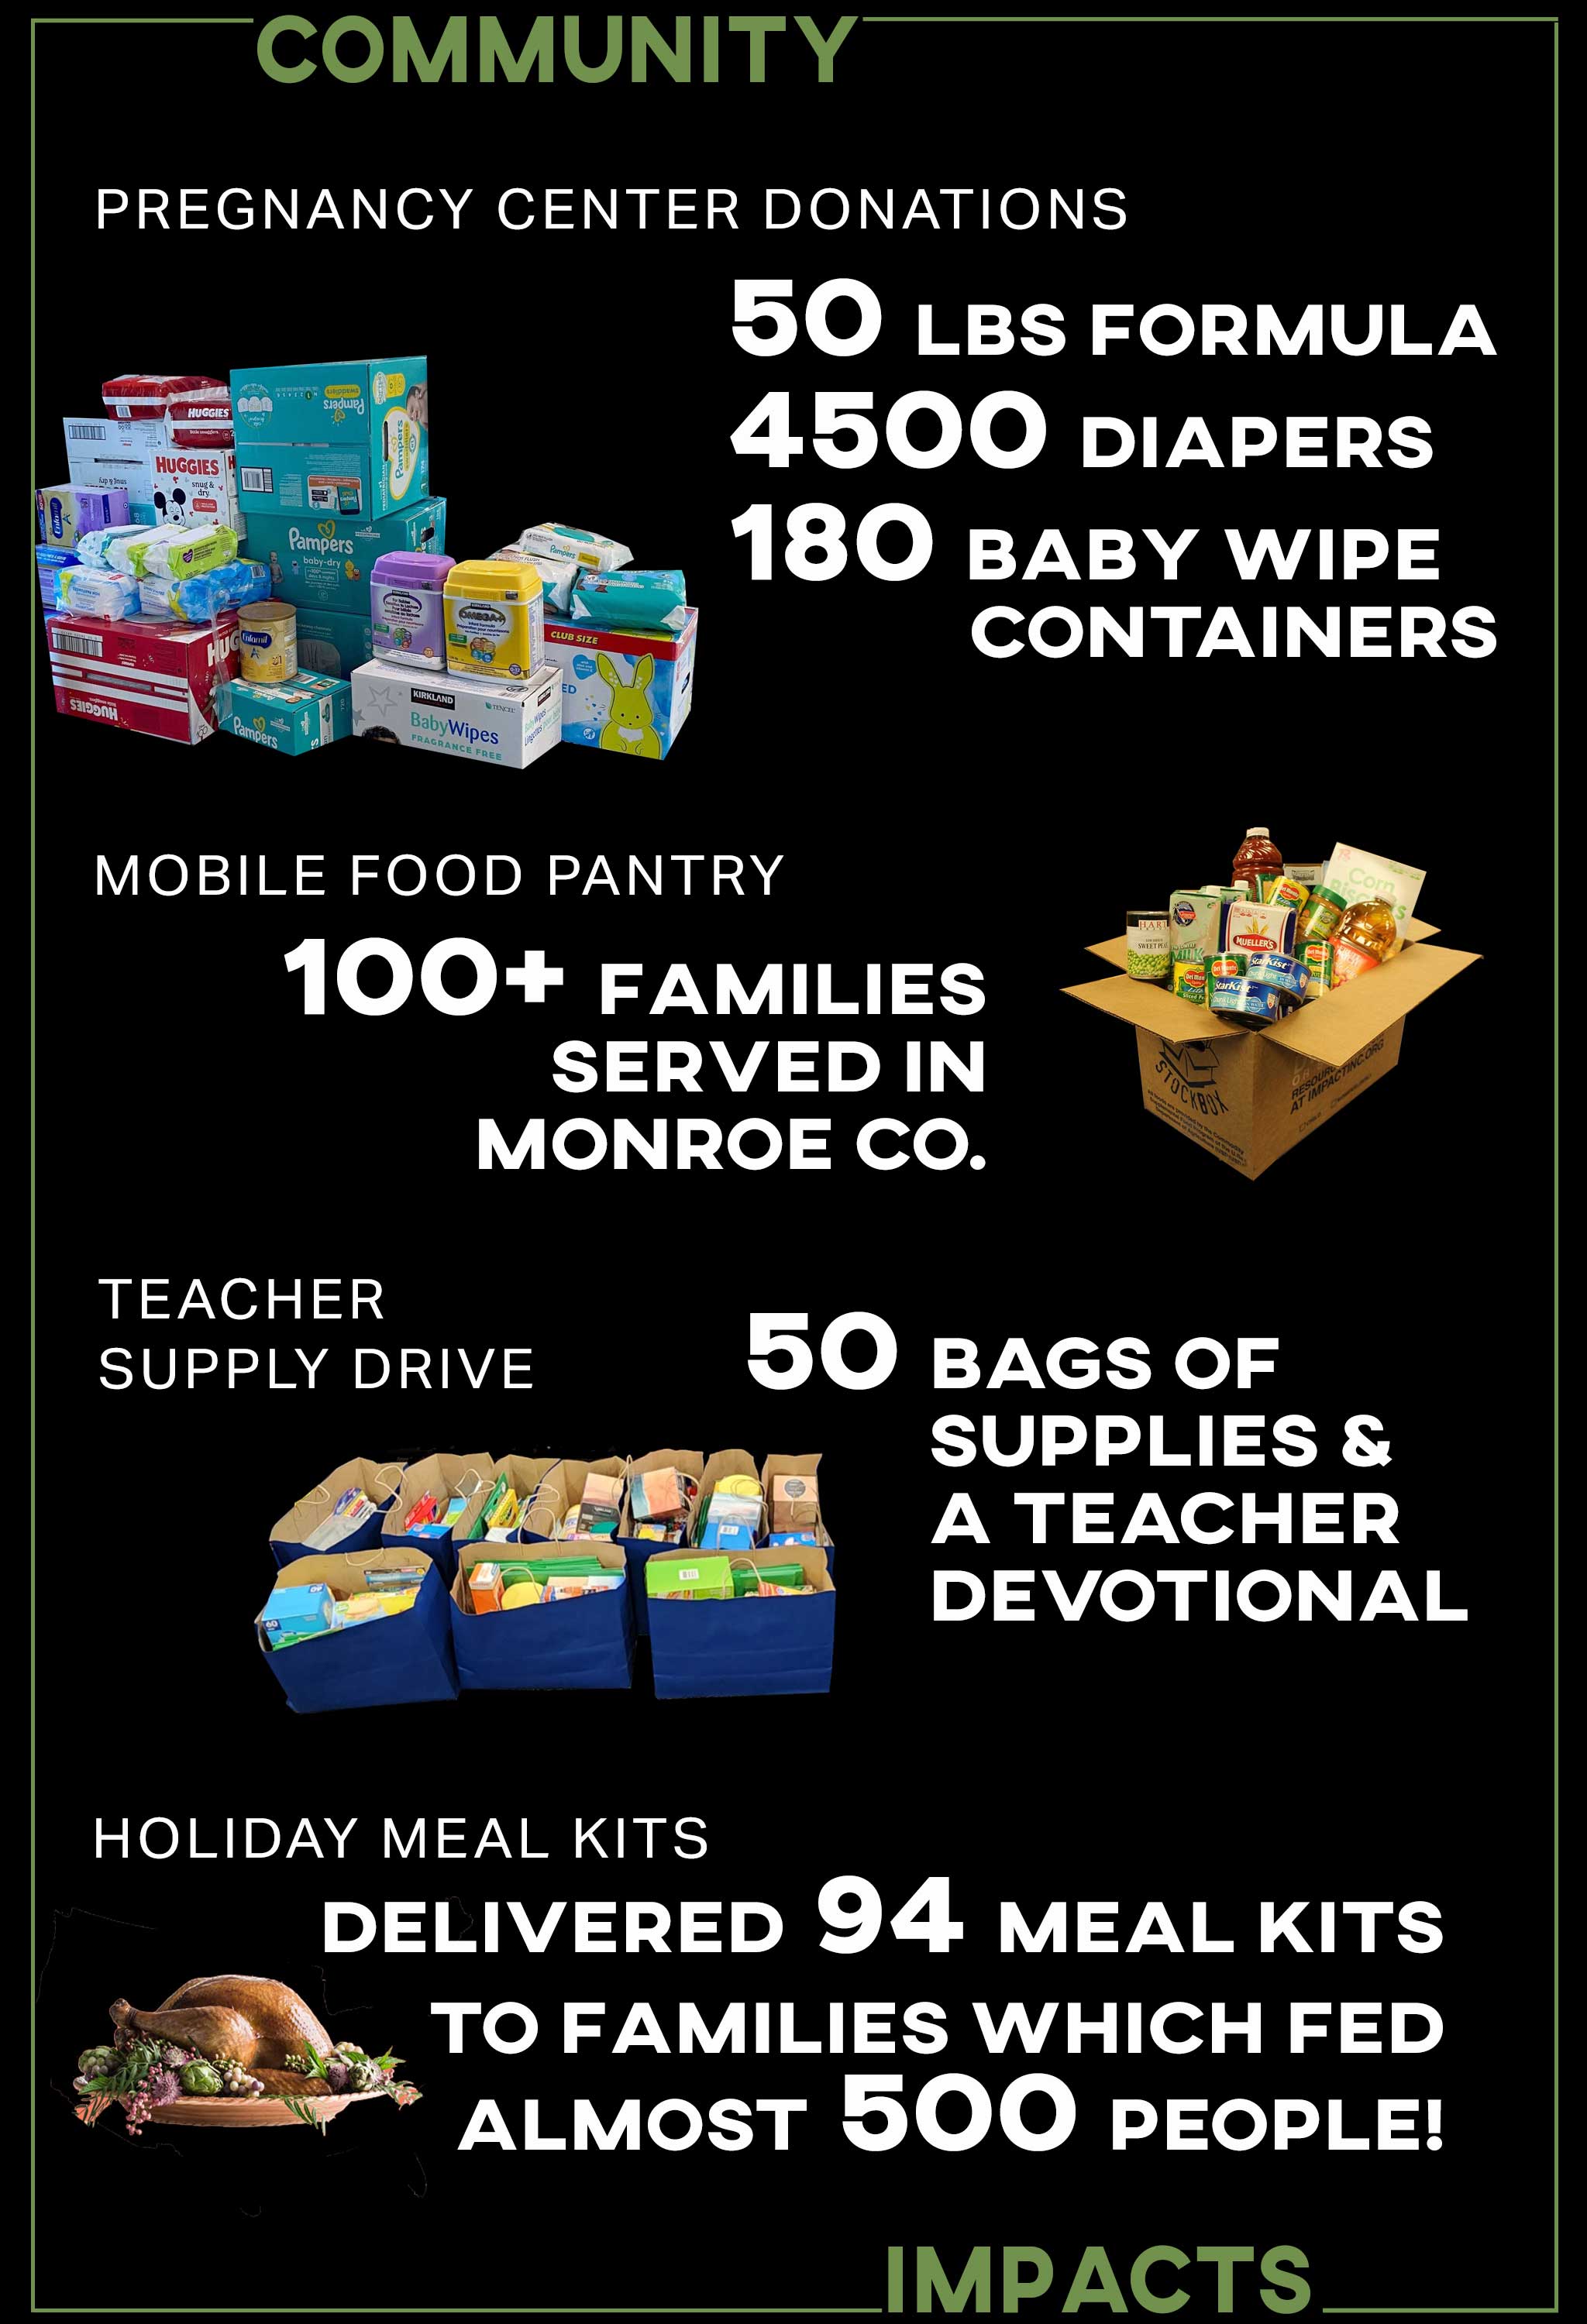 For community impacts, we donated 50 pounds of formula, 4,500 diapers, and 180 containers of baby wipes to the pregnancy center, provided food for over 100 families in Monroe County, supplied local teachers with 50 bags of supplies and devotionals, and delivered 94 meal kits which provided a Thanksgiving meal for almost 500 people.